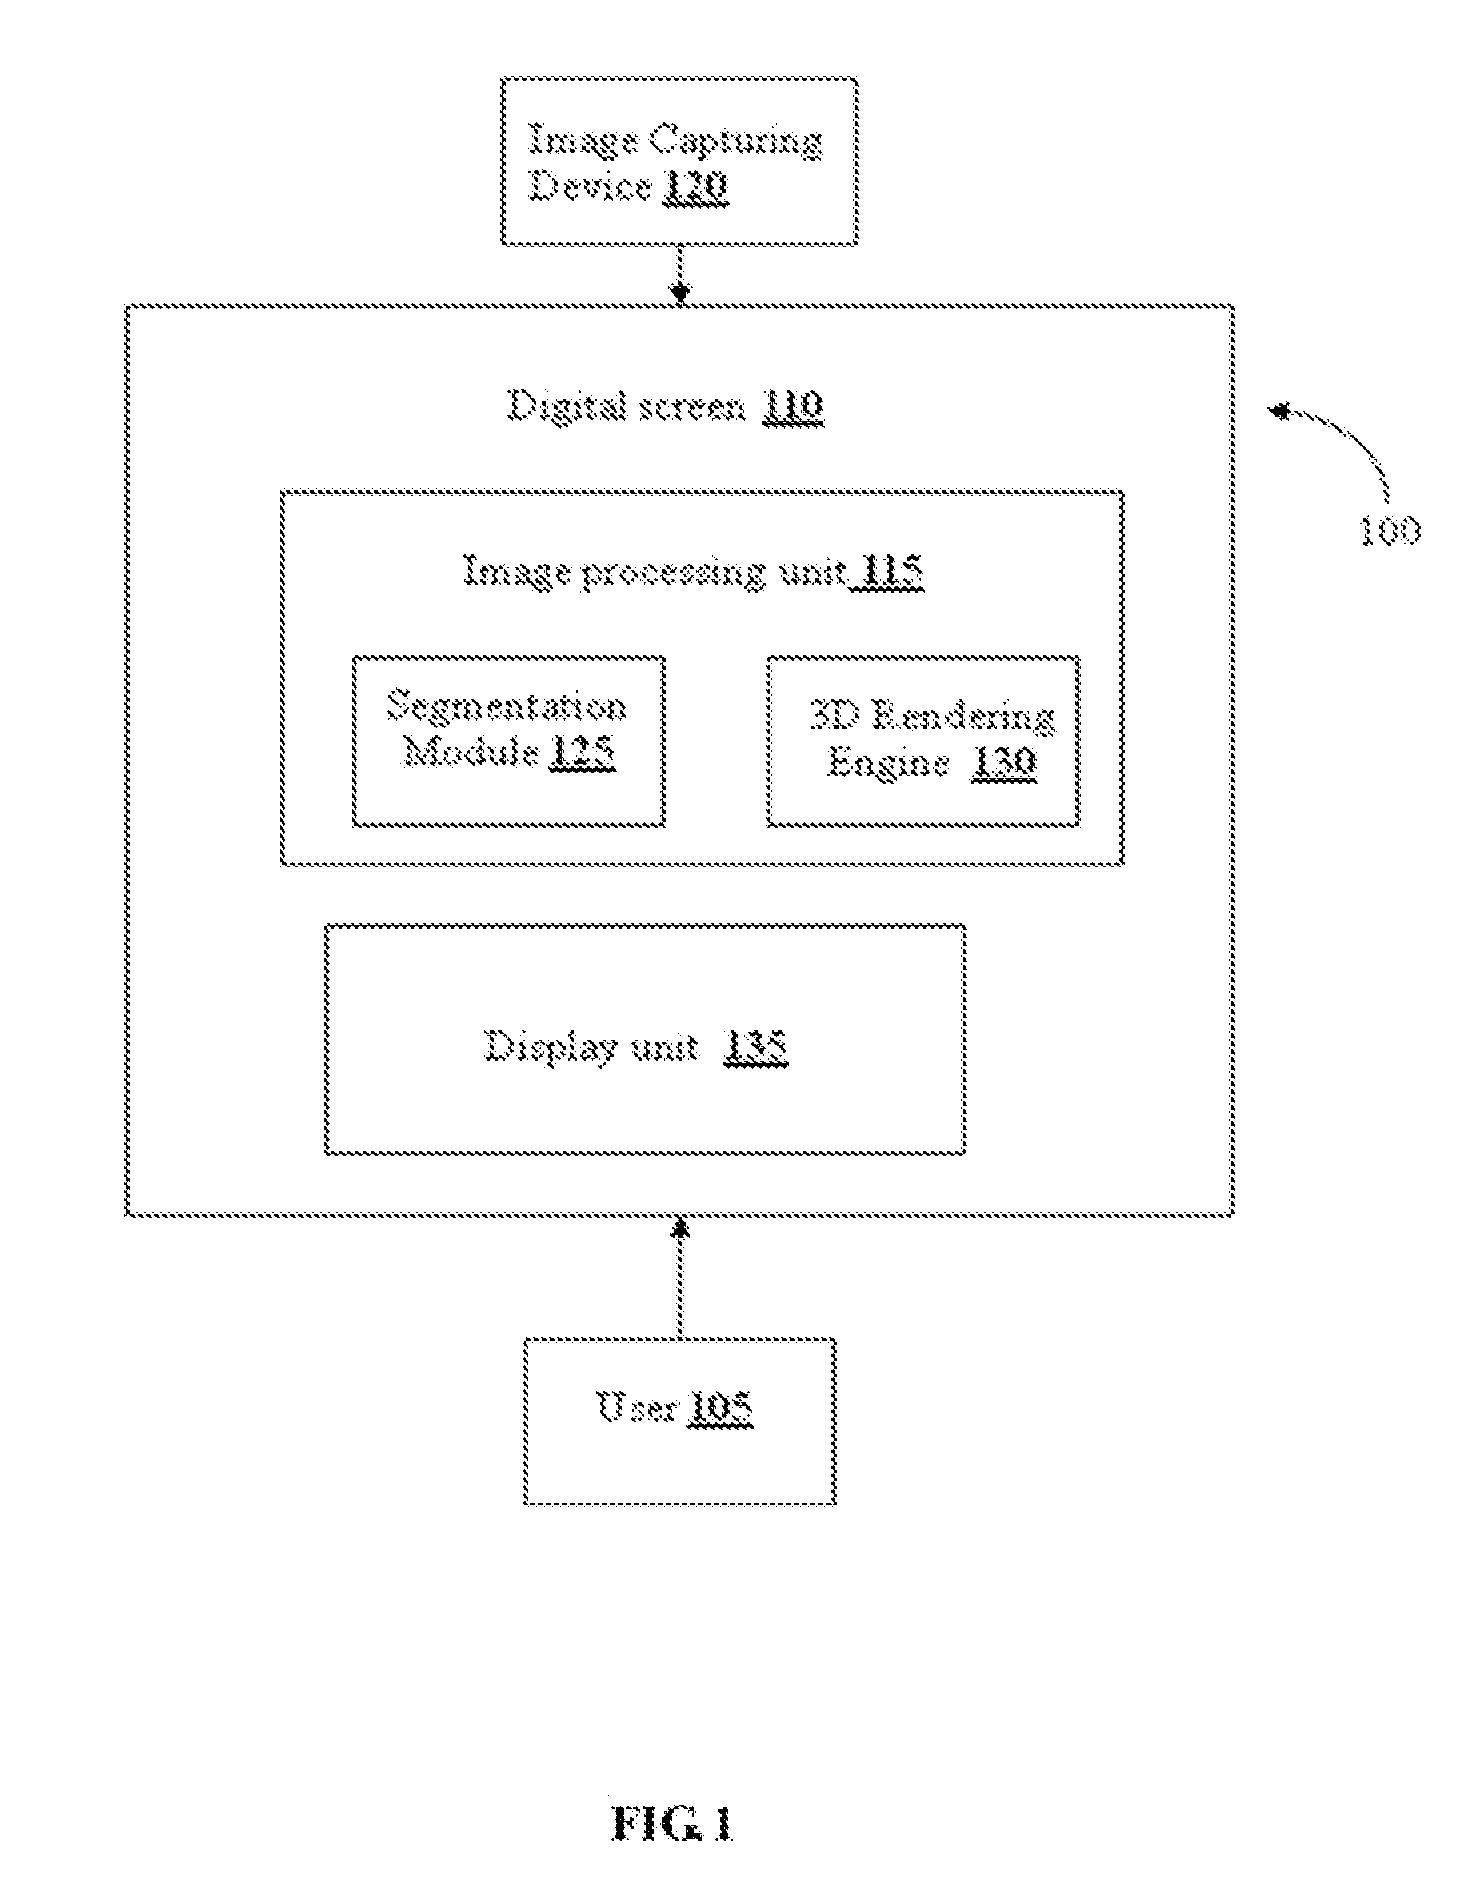 Virtual apparel fitting system and method